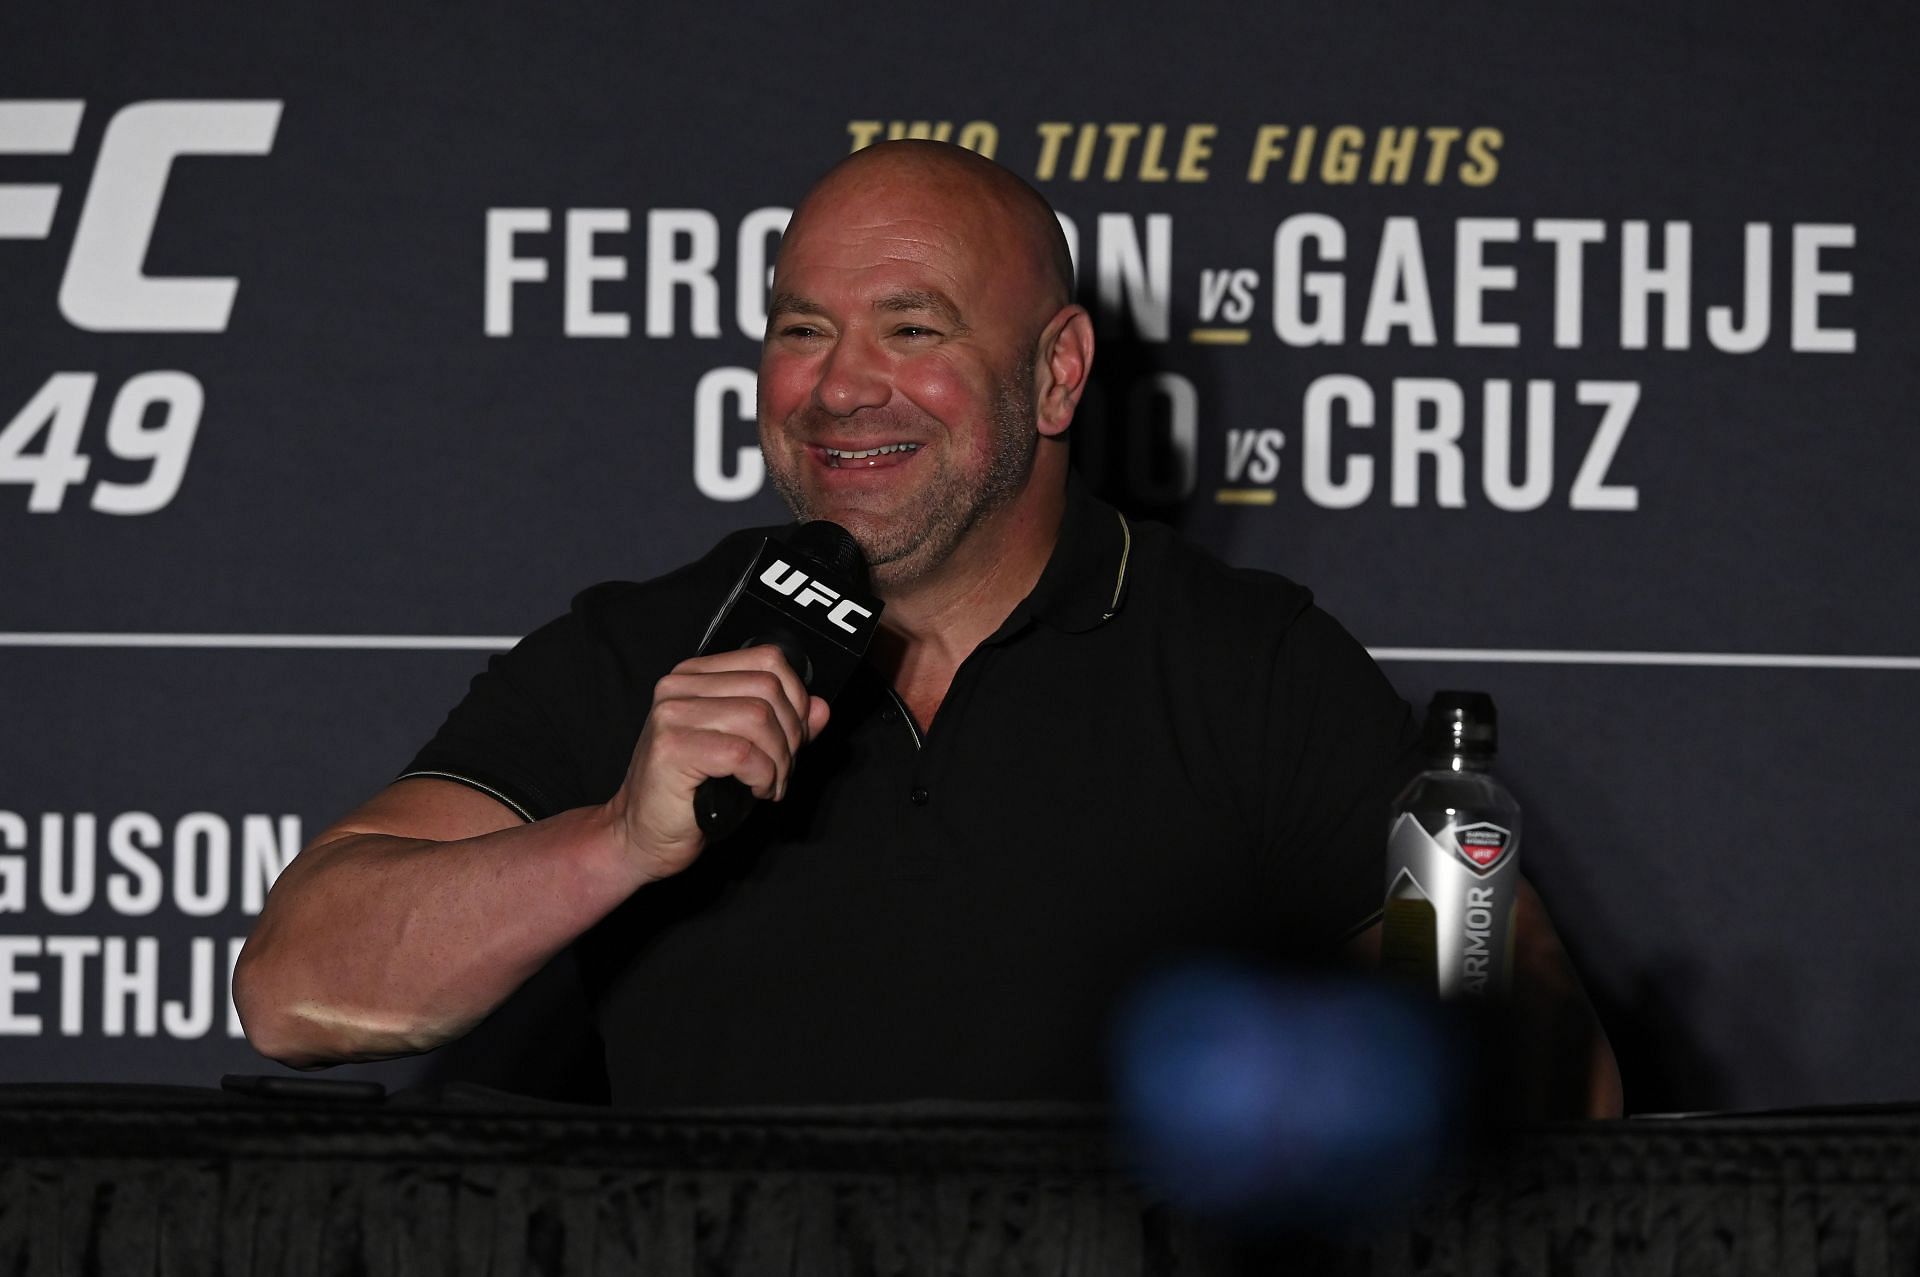 Dana White offered some gambling insight in a recent interview